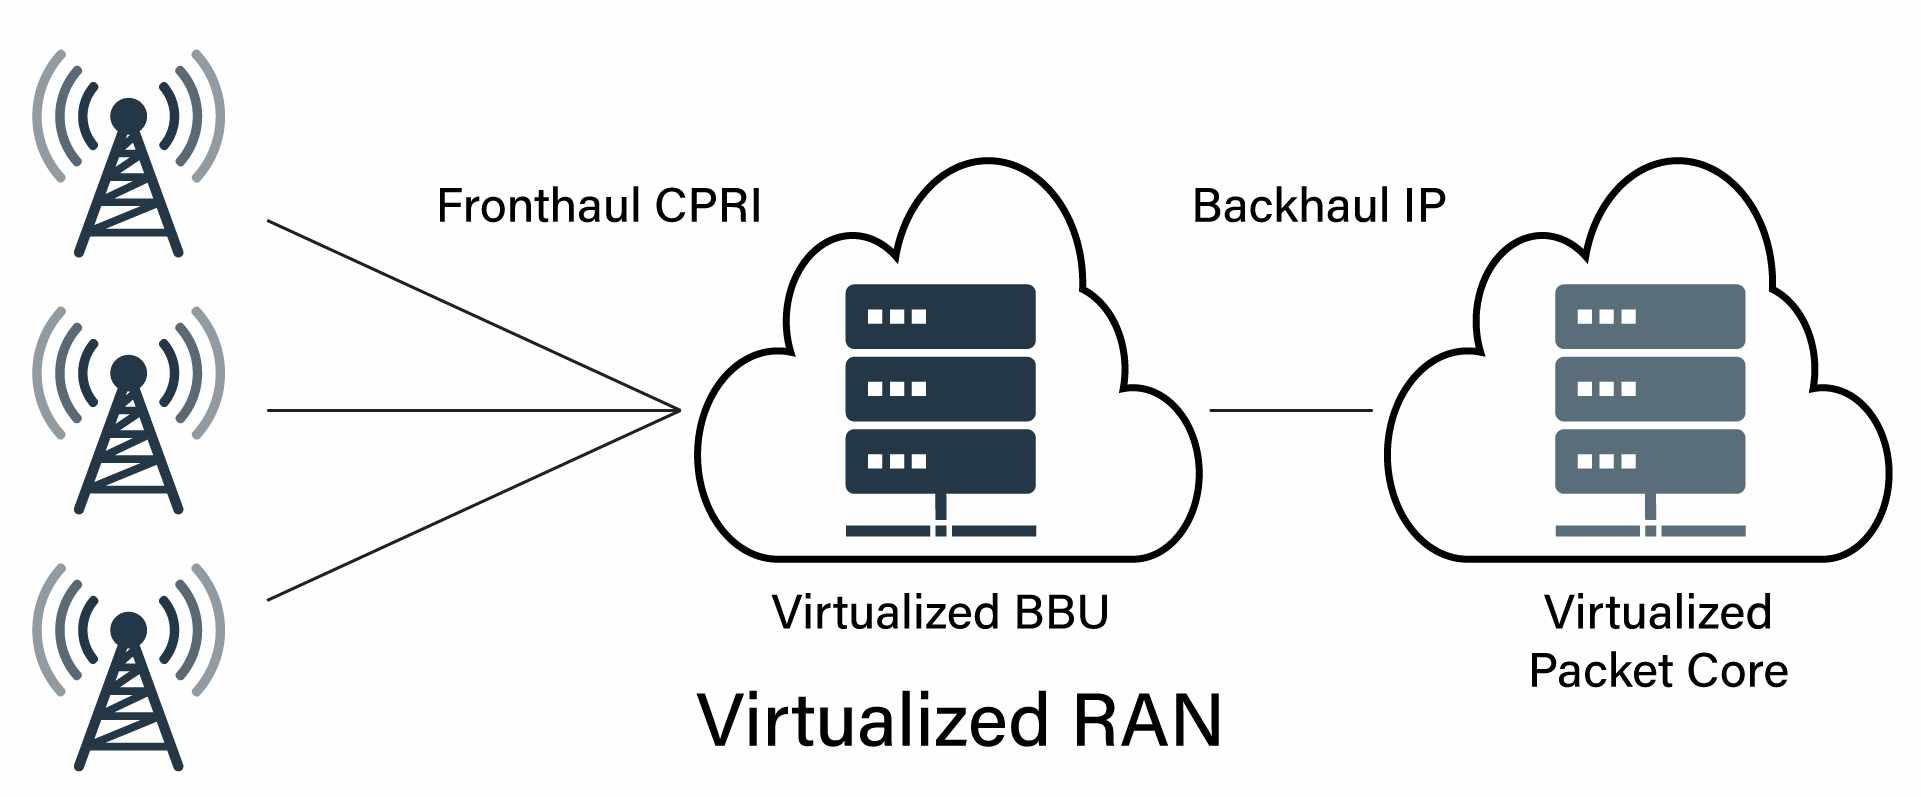 illustration of virtualized RAN with fronthaul CPRI and Backhaul IP.